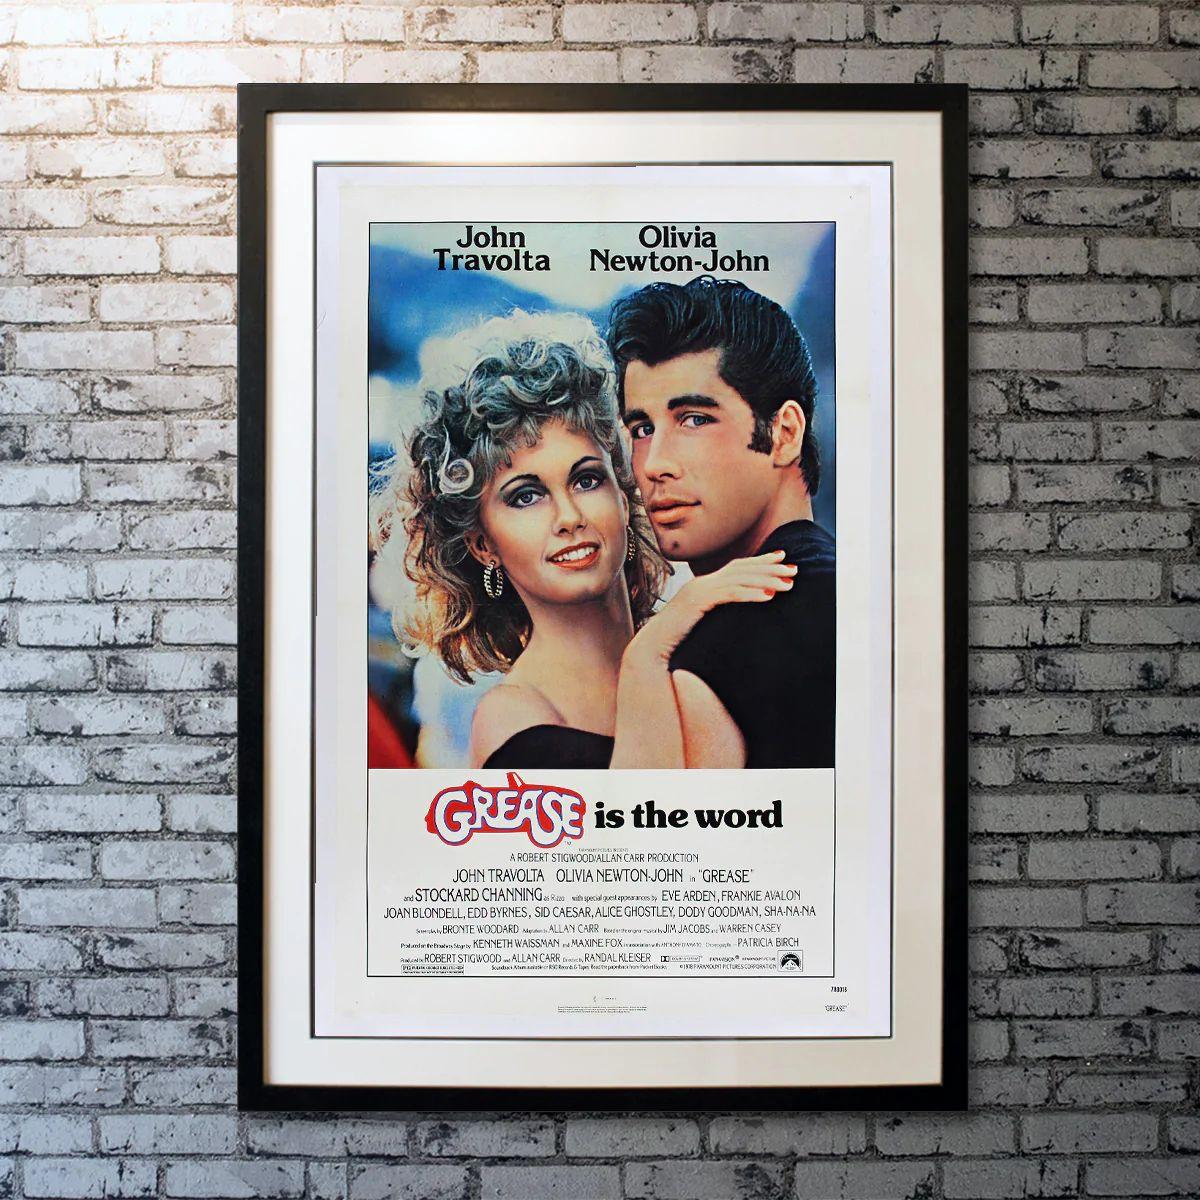 Grease, Unframed Poster, 1978

Original US One Sheet (27 X 41 Inches). Good girl Sandy Olsson and greaser Danny Zuko fell in love over the summer. When they unexpectedly discover they're now in the same high school, will they be able to rekindle